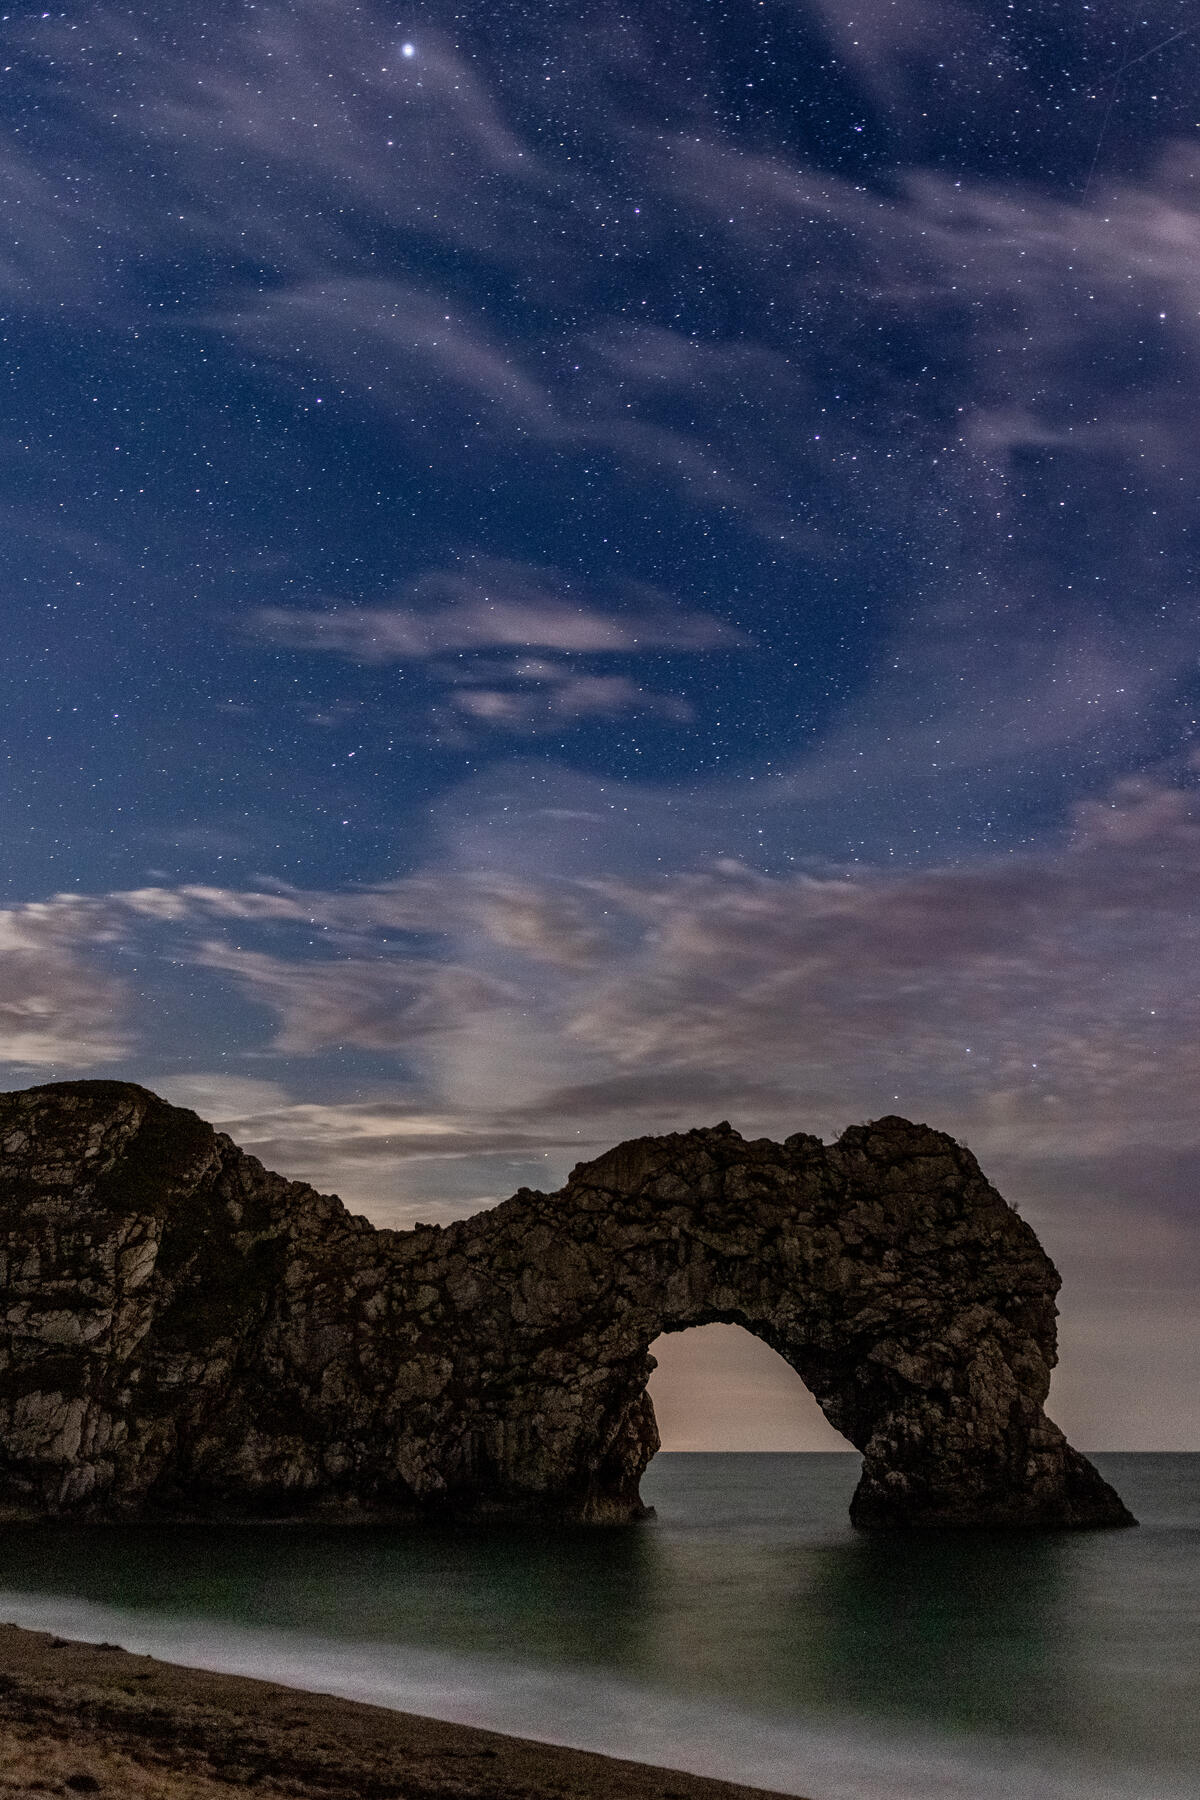 Rock with an arch on the seashore at sunset